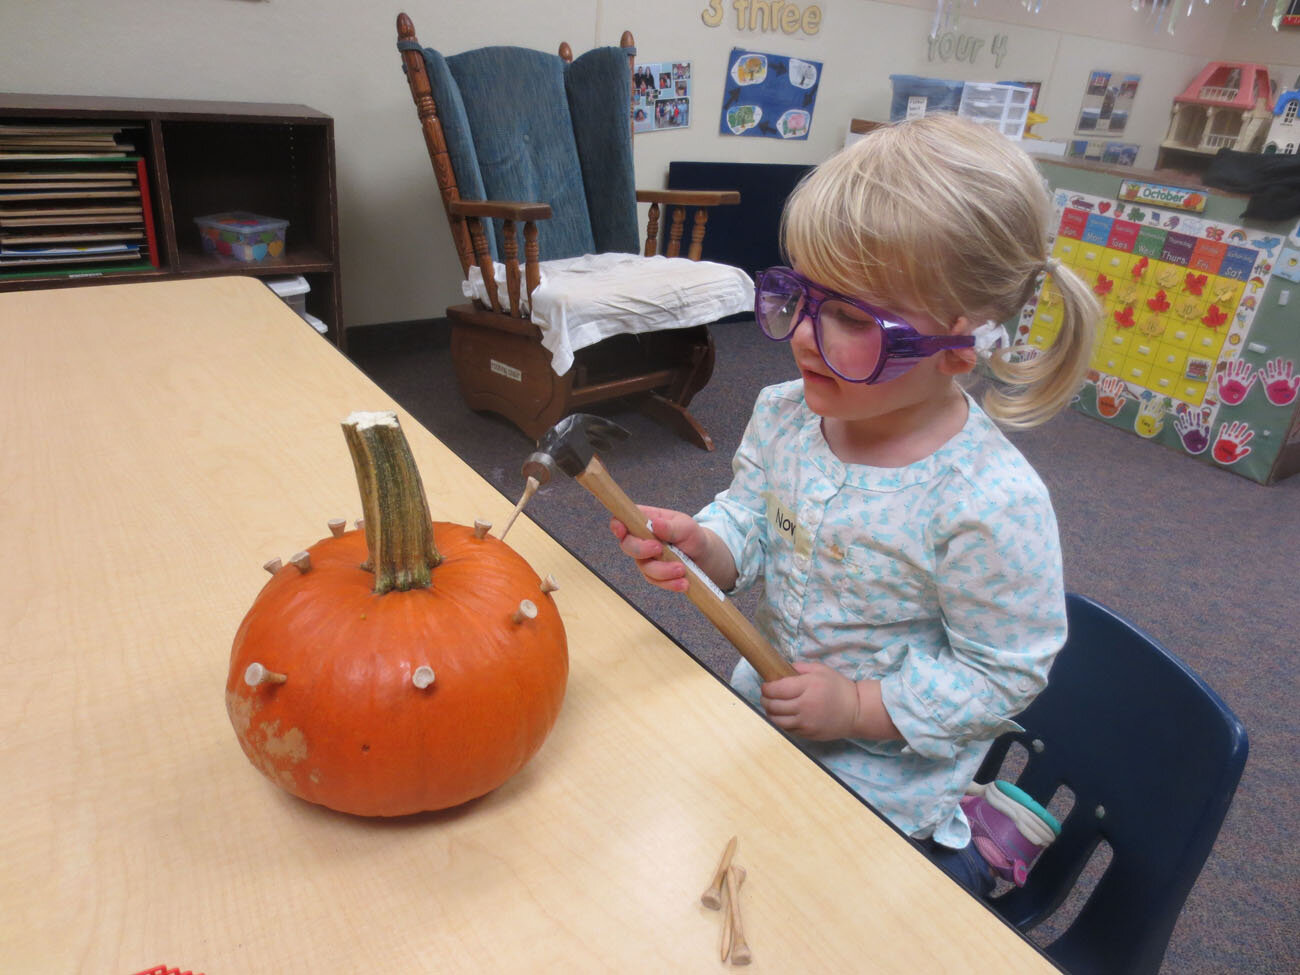 tlc-early-learning-center-bloomington-mn-3-year-olds-classroom (15).jpg